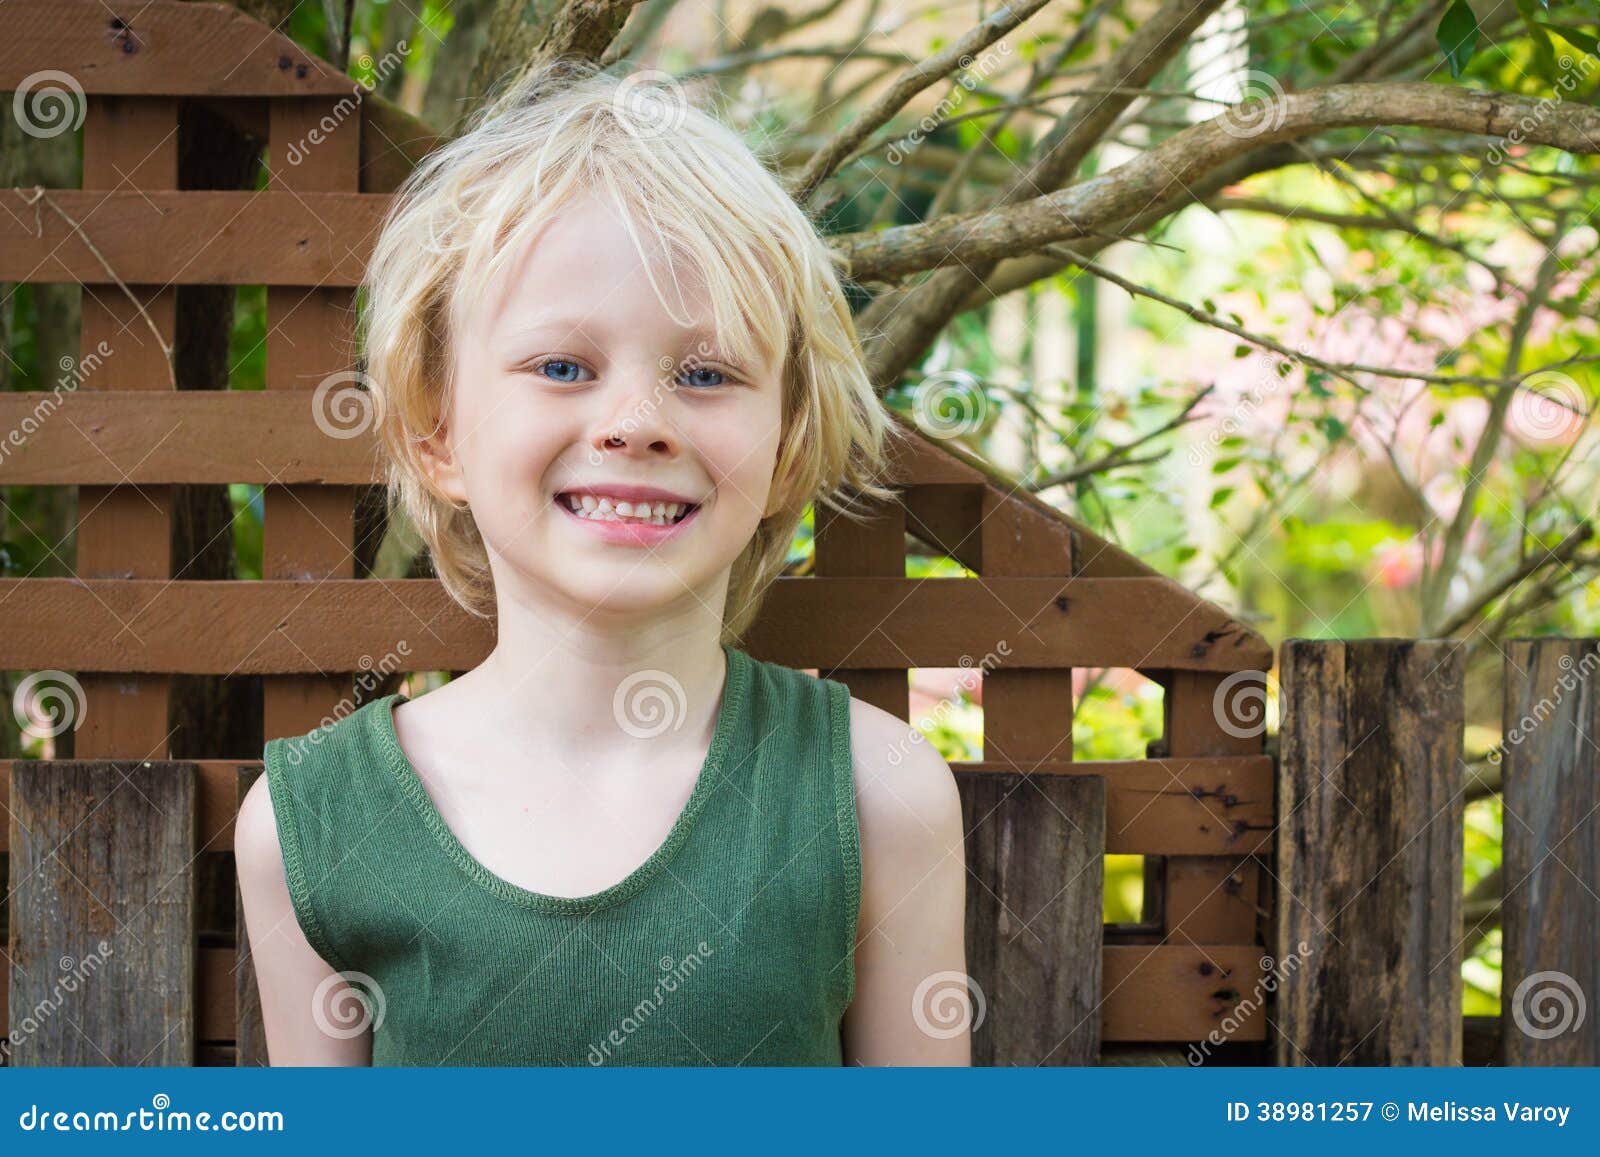 Happy Boy Messy And Grubby From Outdoor Play Stock Photo - Image: 38981257